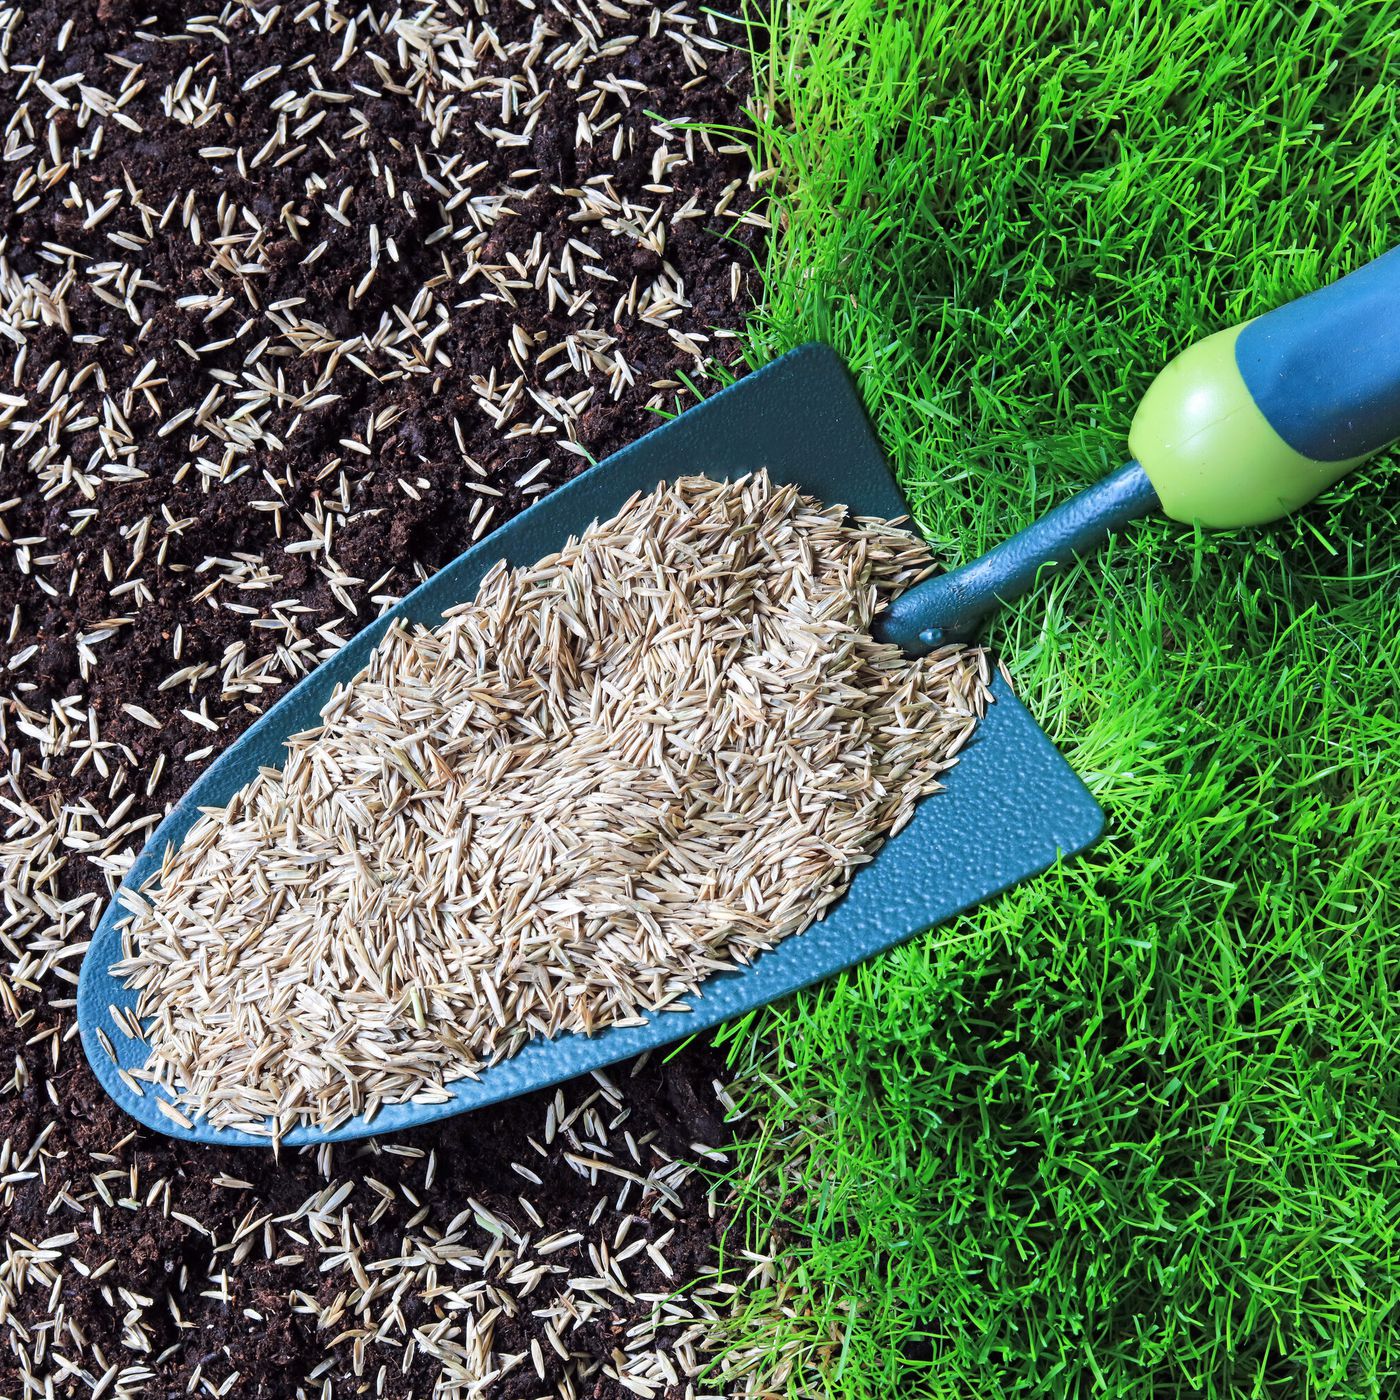 choosing-seeds-for-your-garden How to Choose Quality Seeds for Your Lawn and Garden